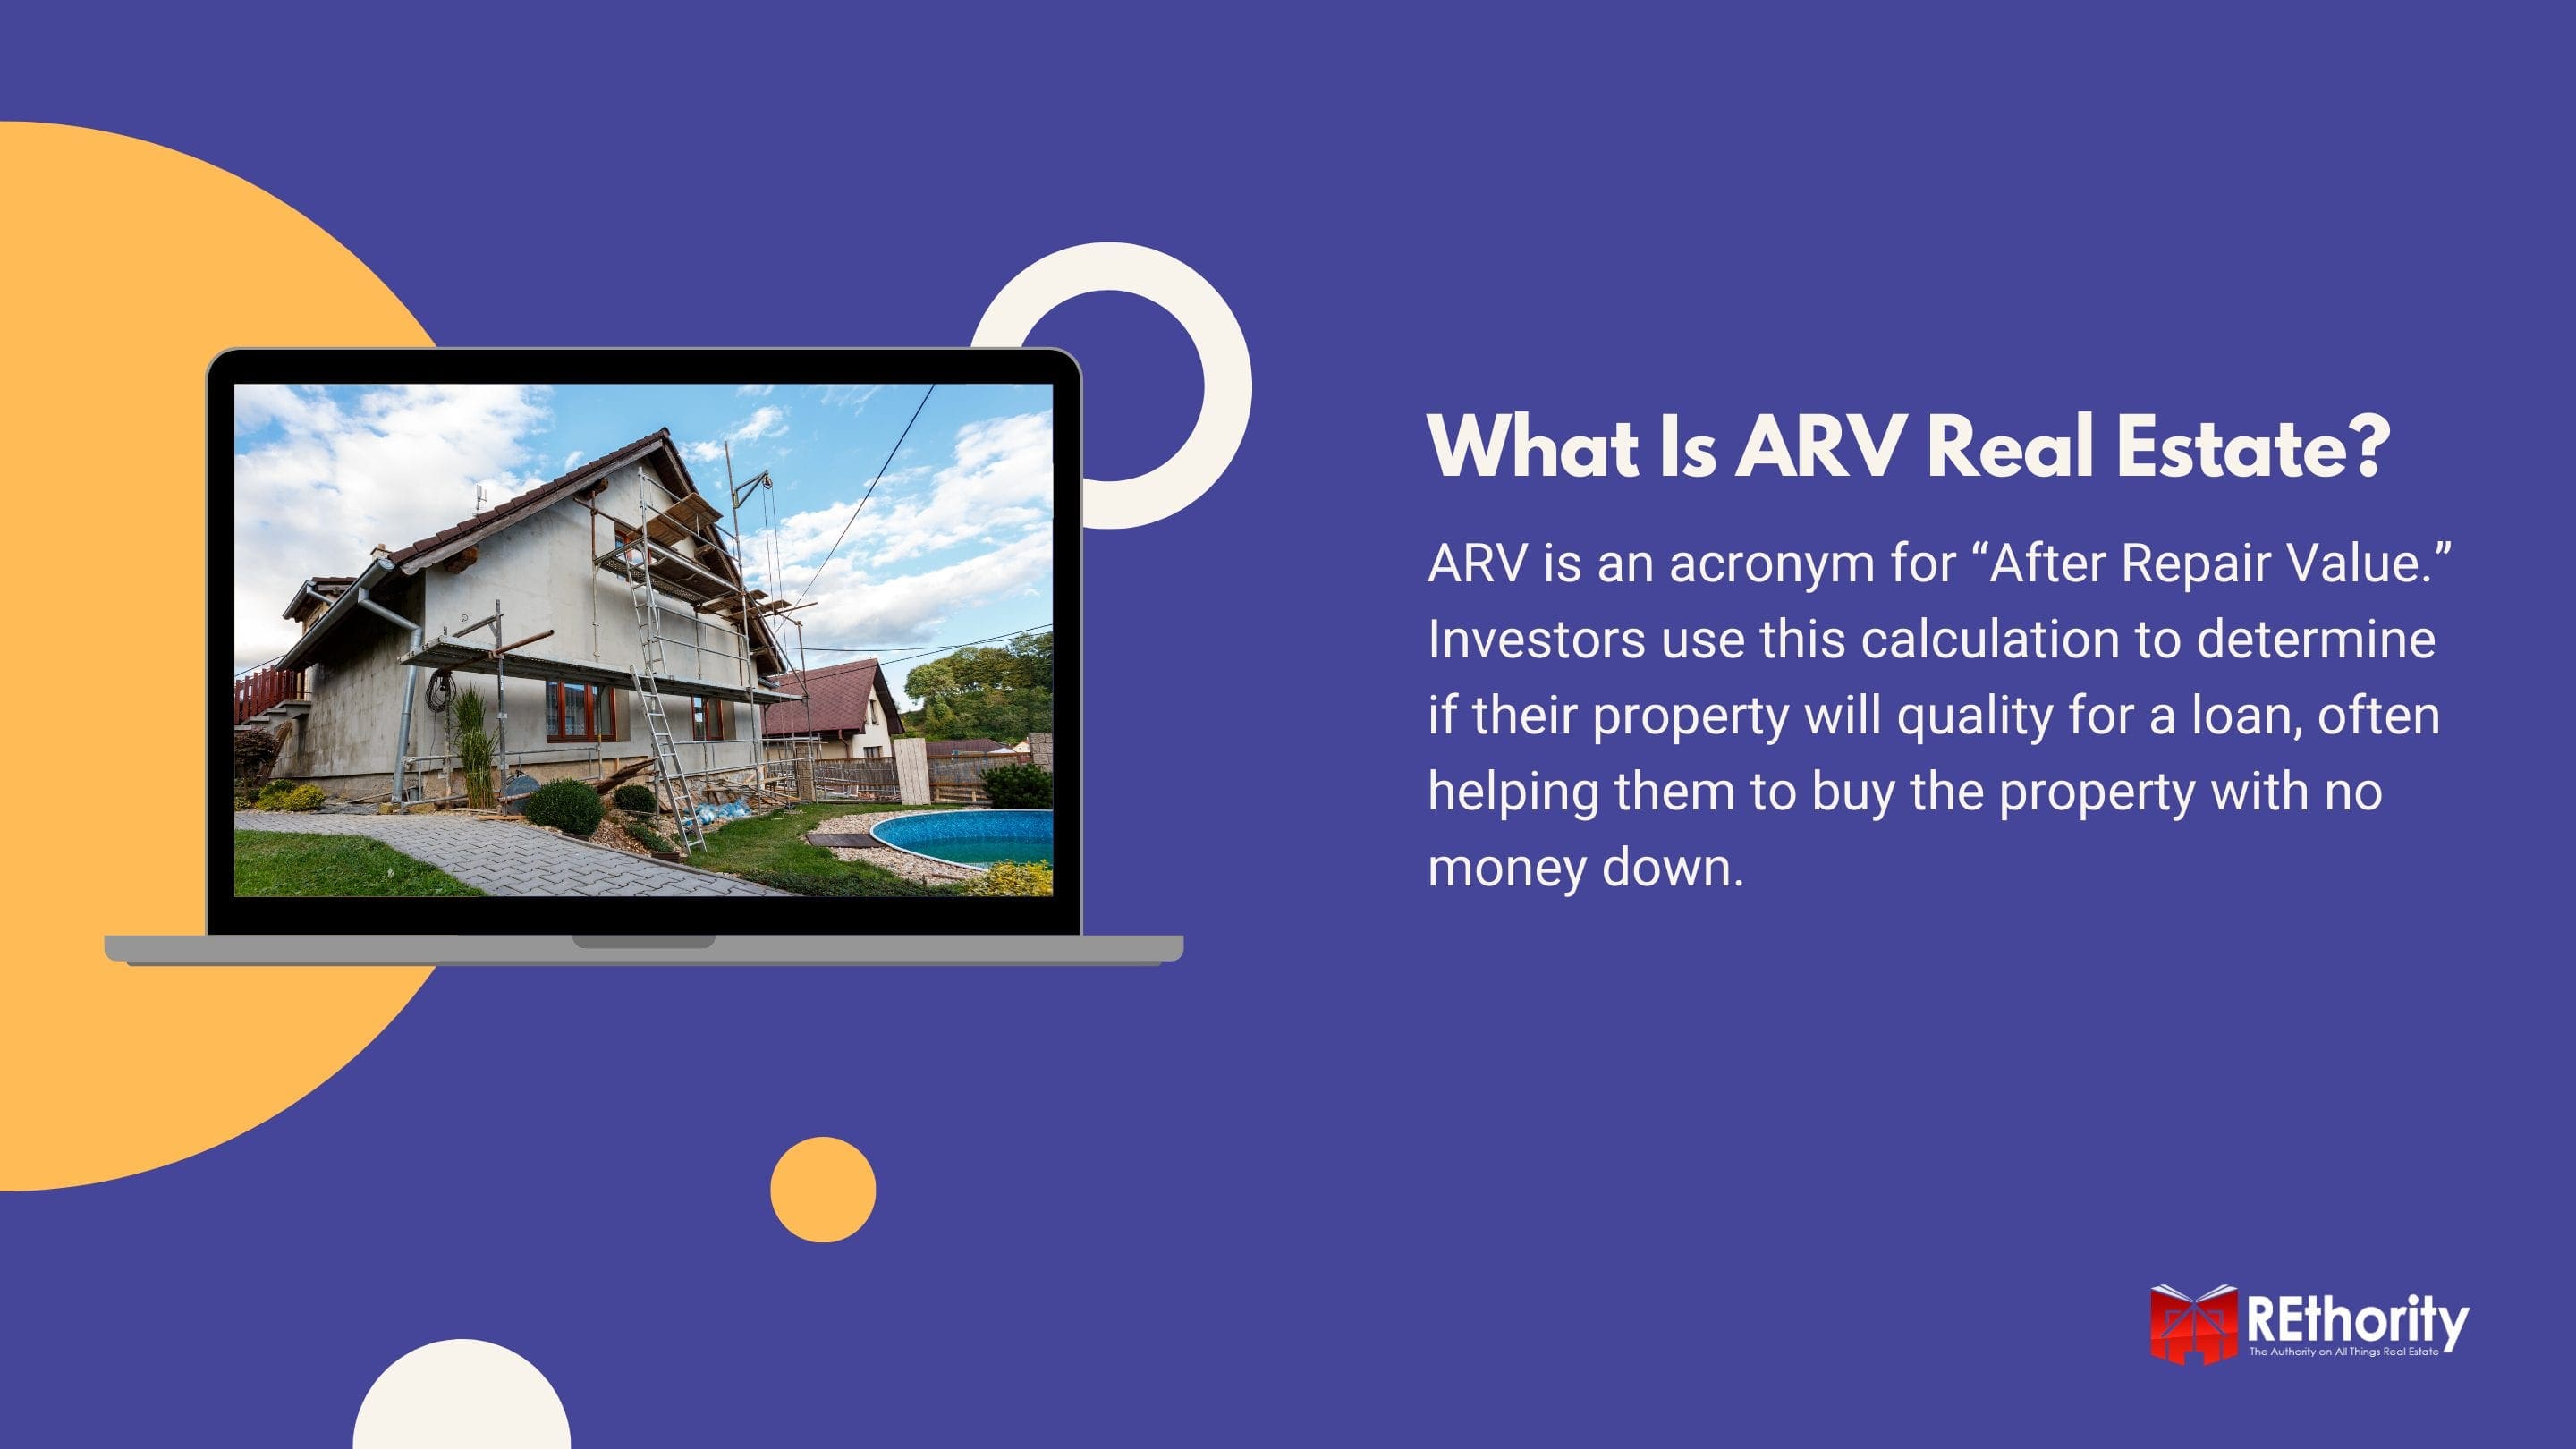 What Is ARV Real Estate_ graphic against blue background